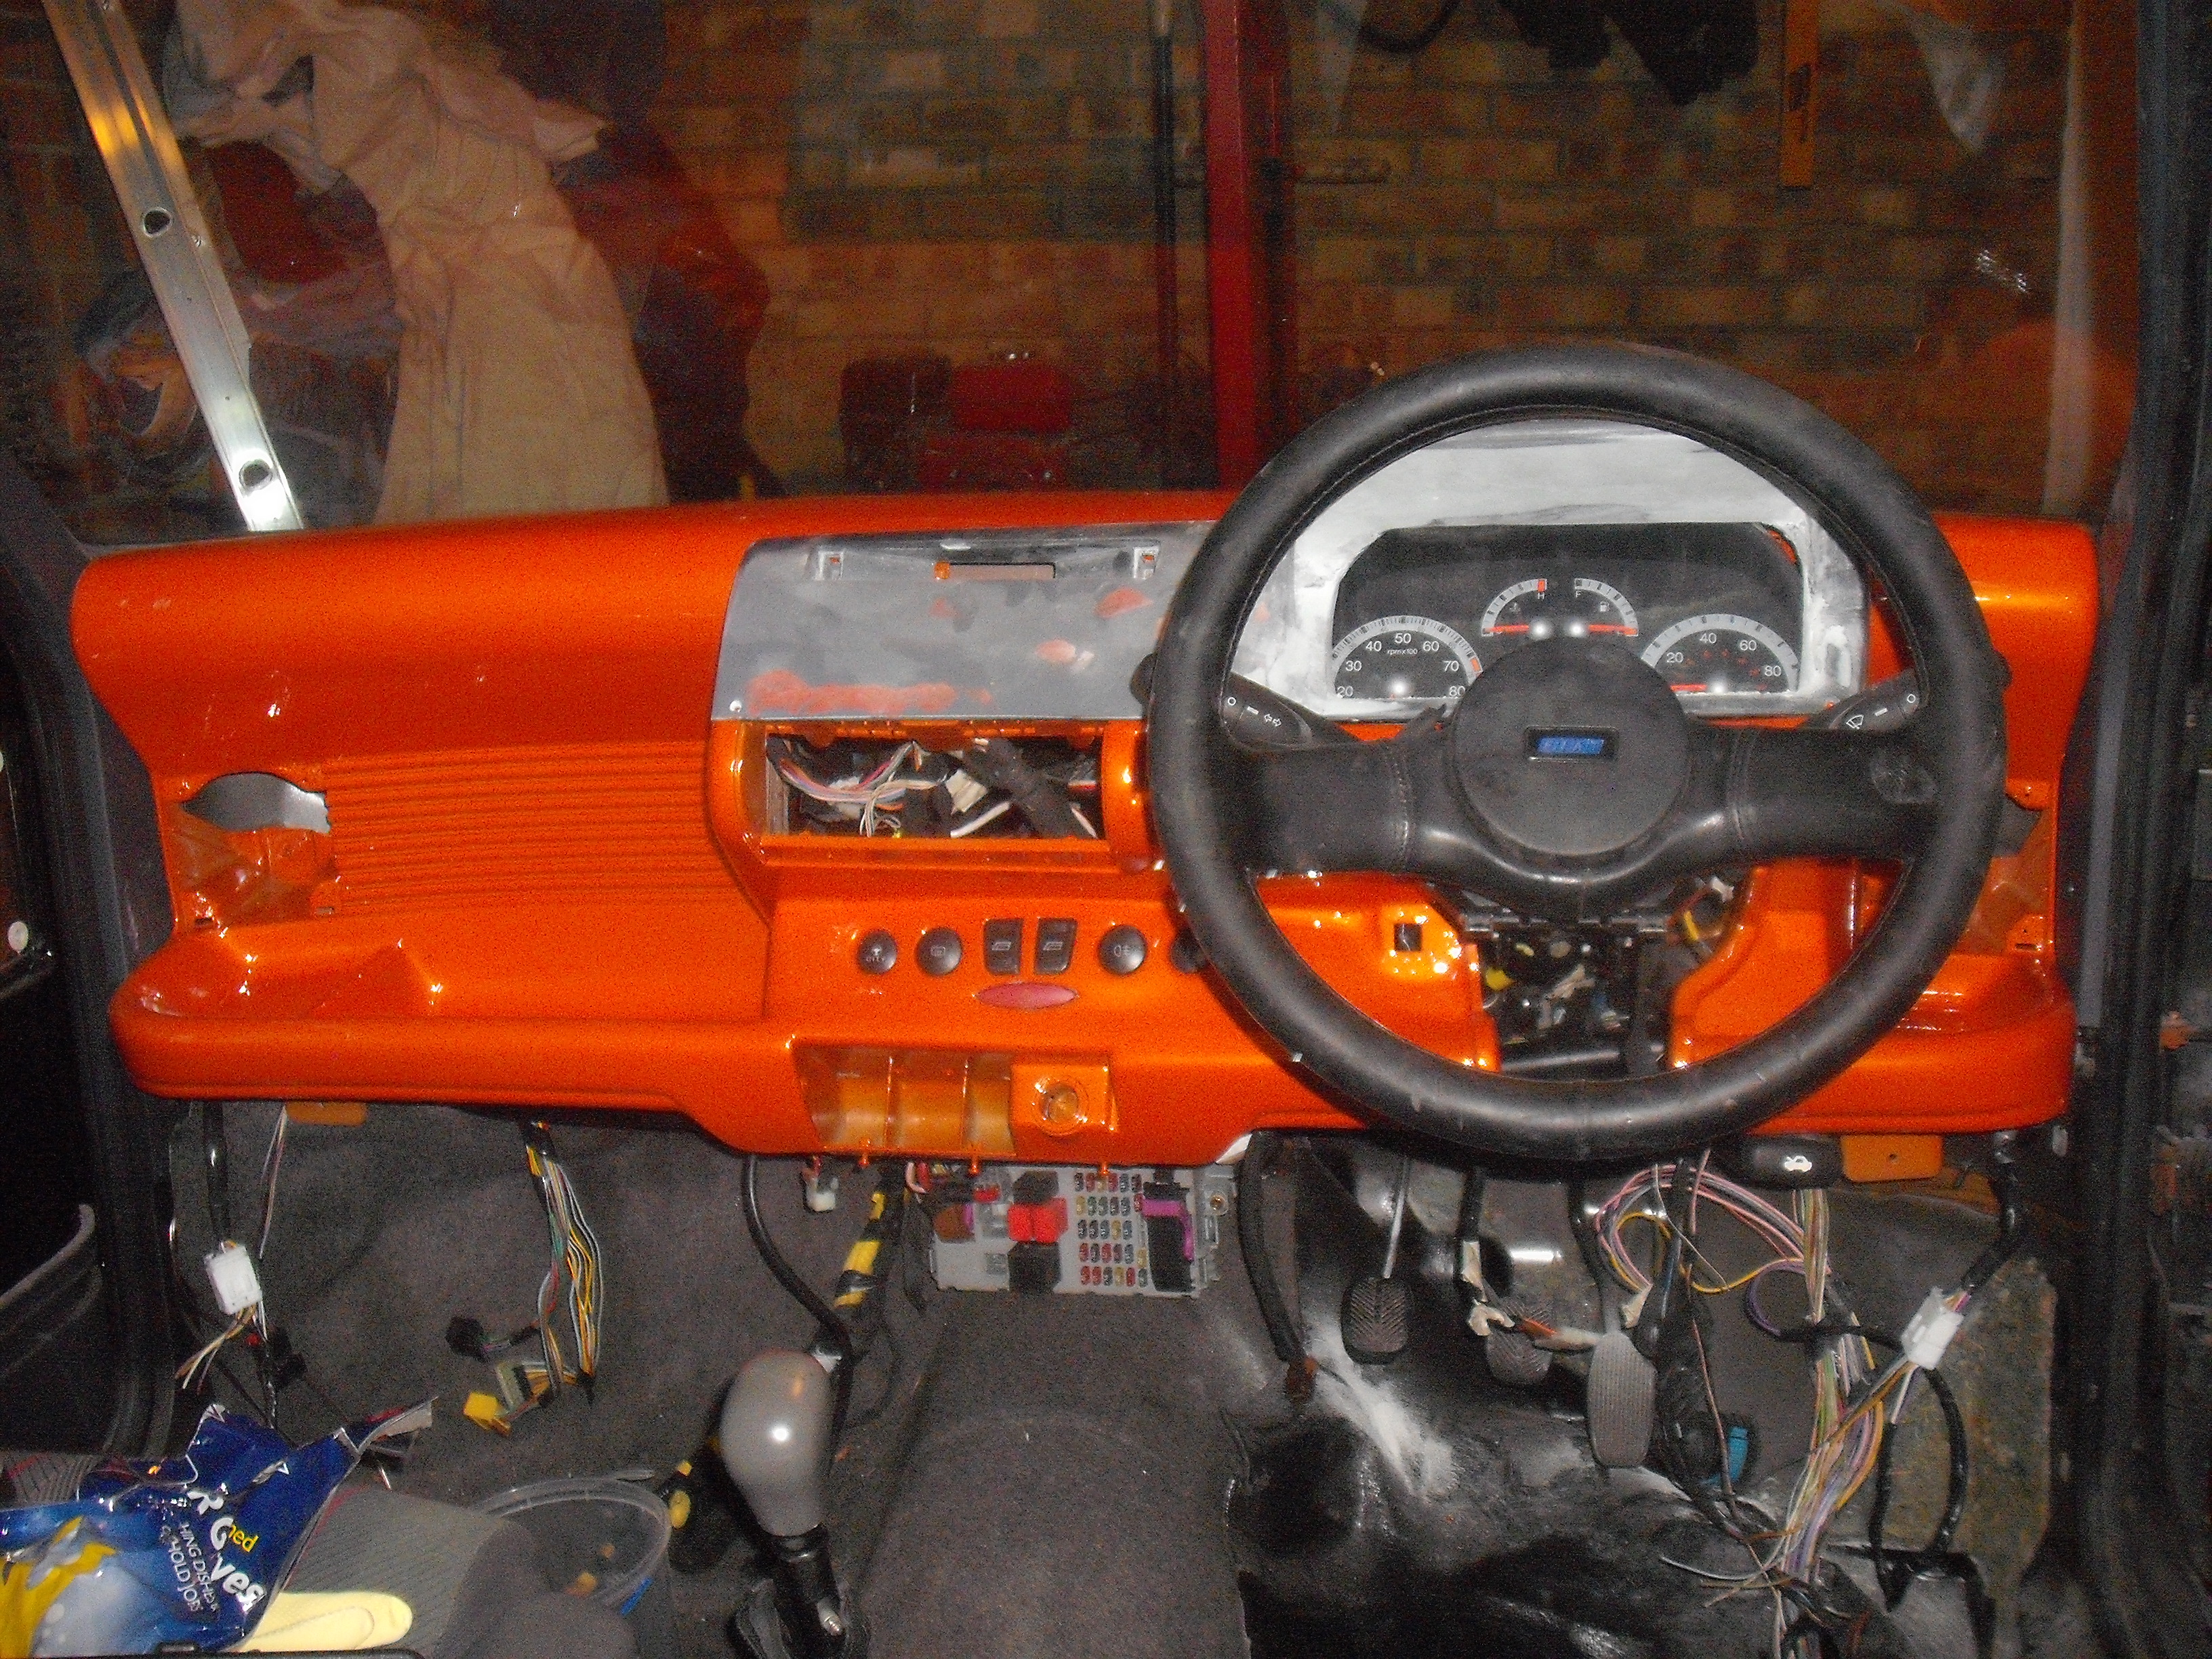 Smoothed and painted Cinq dash